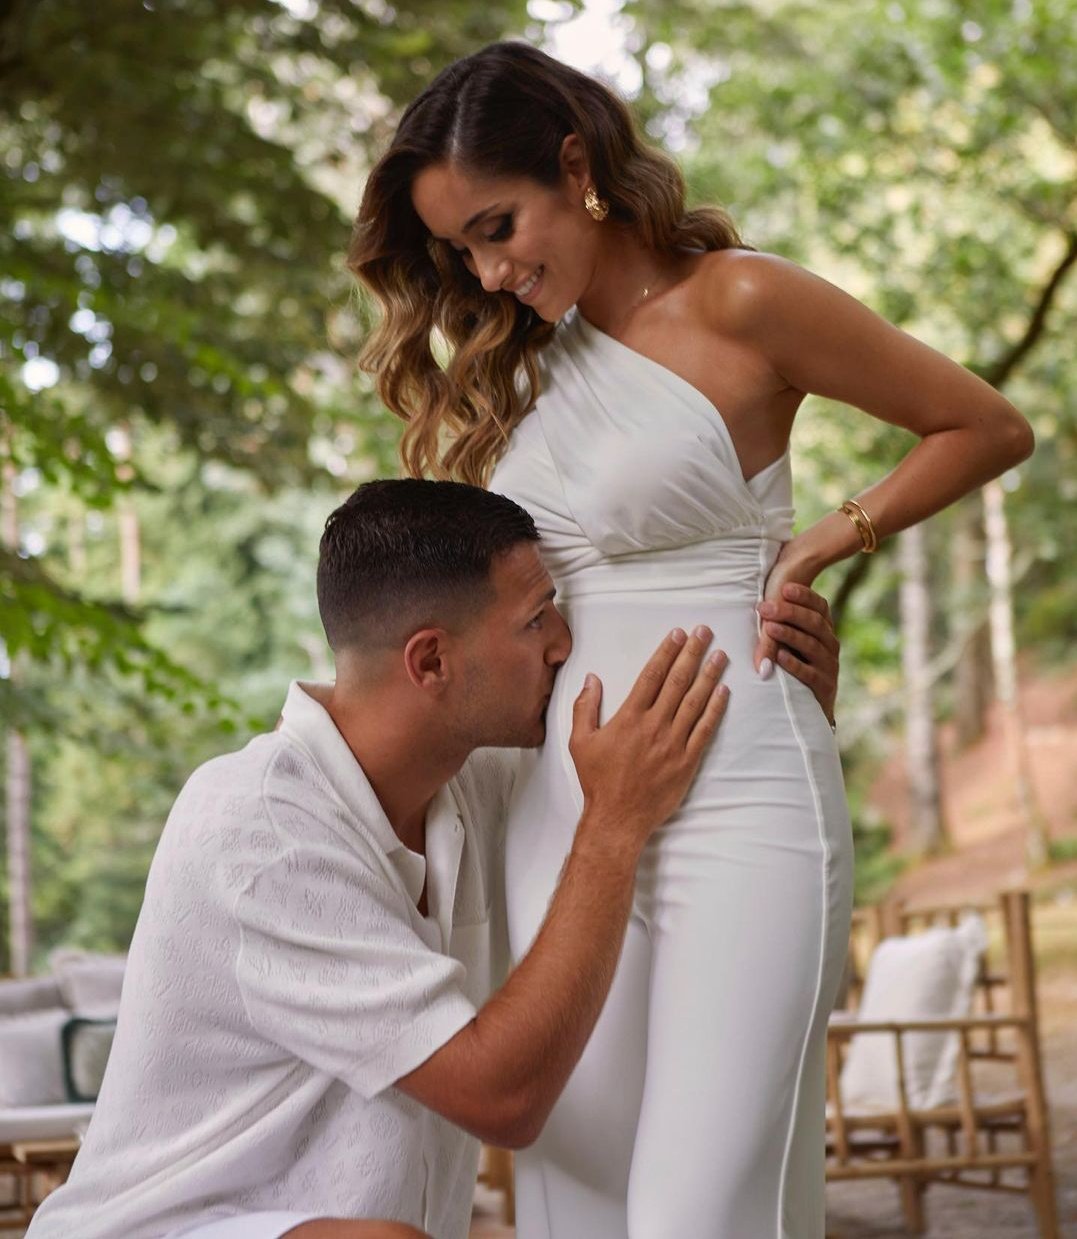 UF on X: "Diogo Dalot on Instagram. "The best gift we could ever wish for.  We can't wait to meet you. 🤍" Congratulations to Dalot and his partner,  who are expecting their